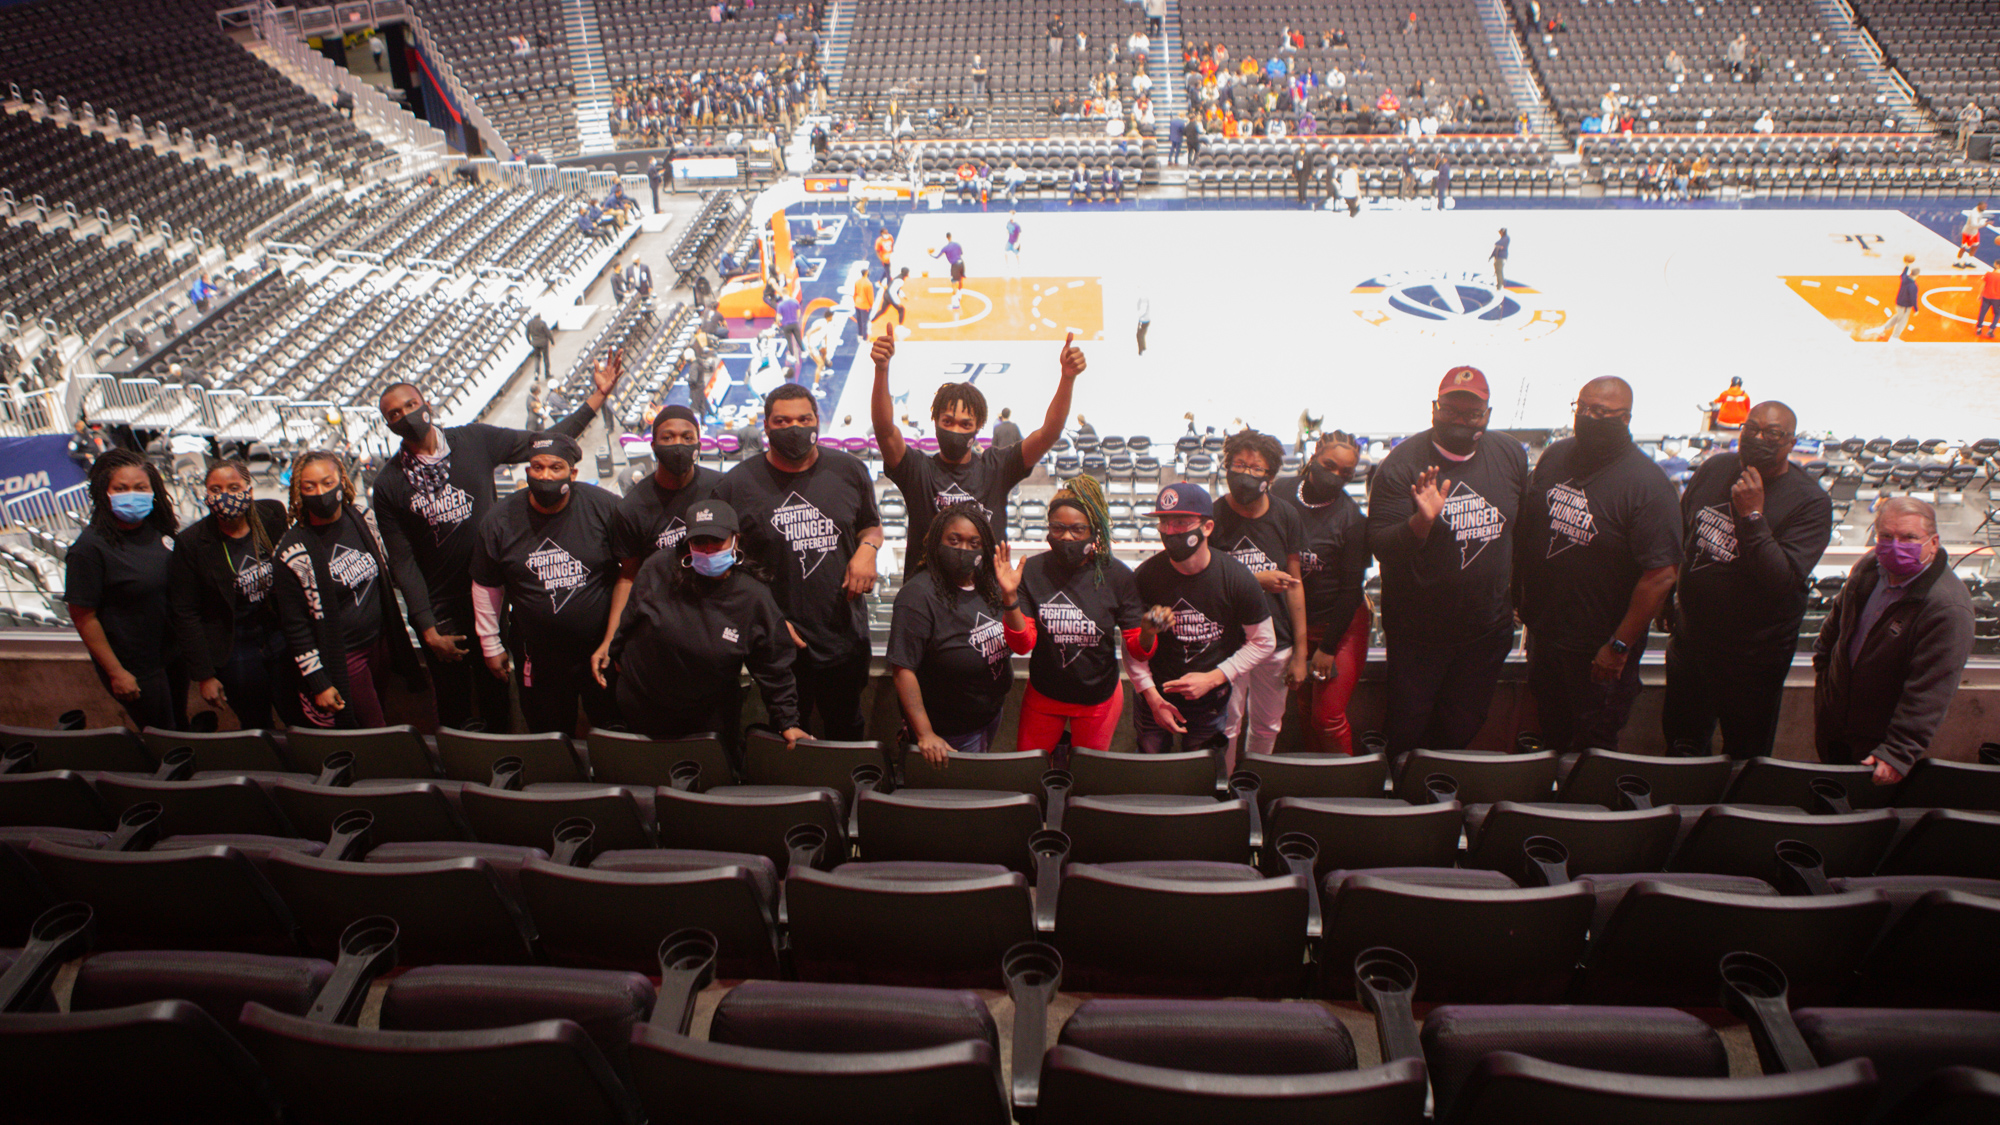 Culinary Job Training Class 126 at the Wizards Game